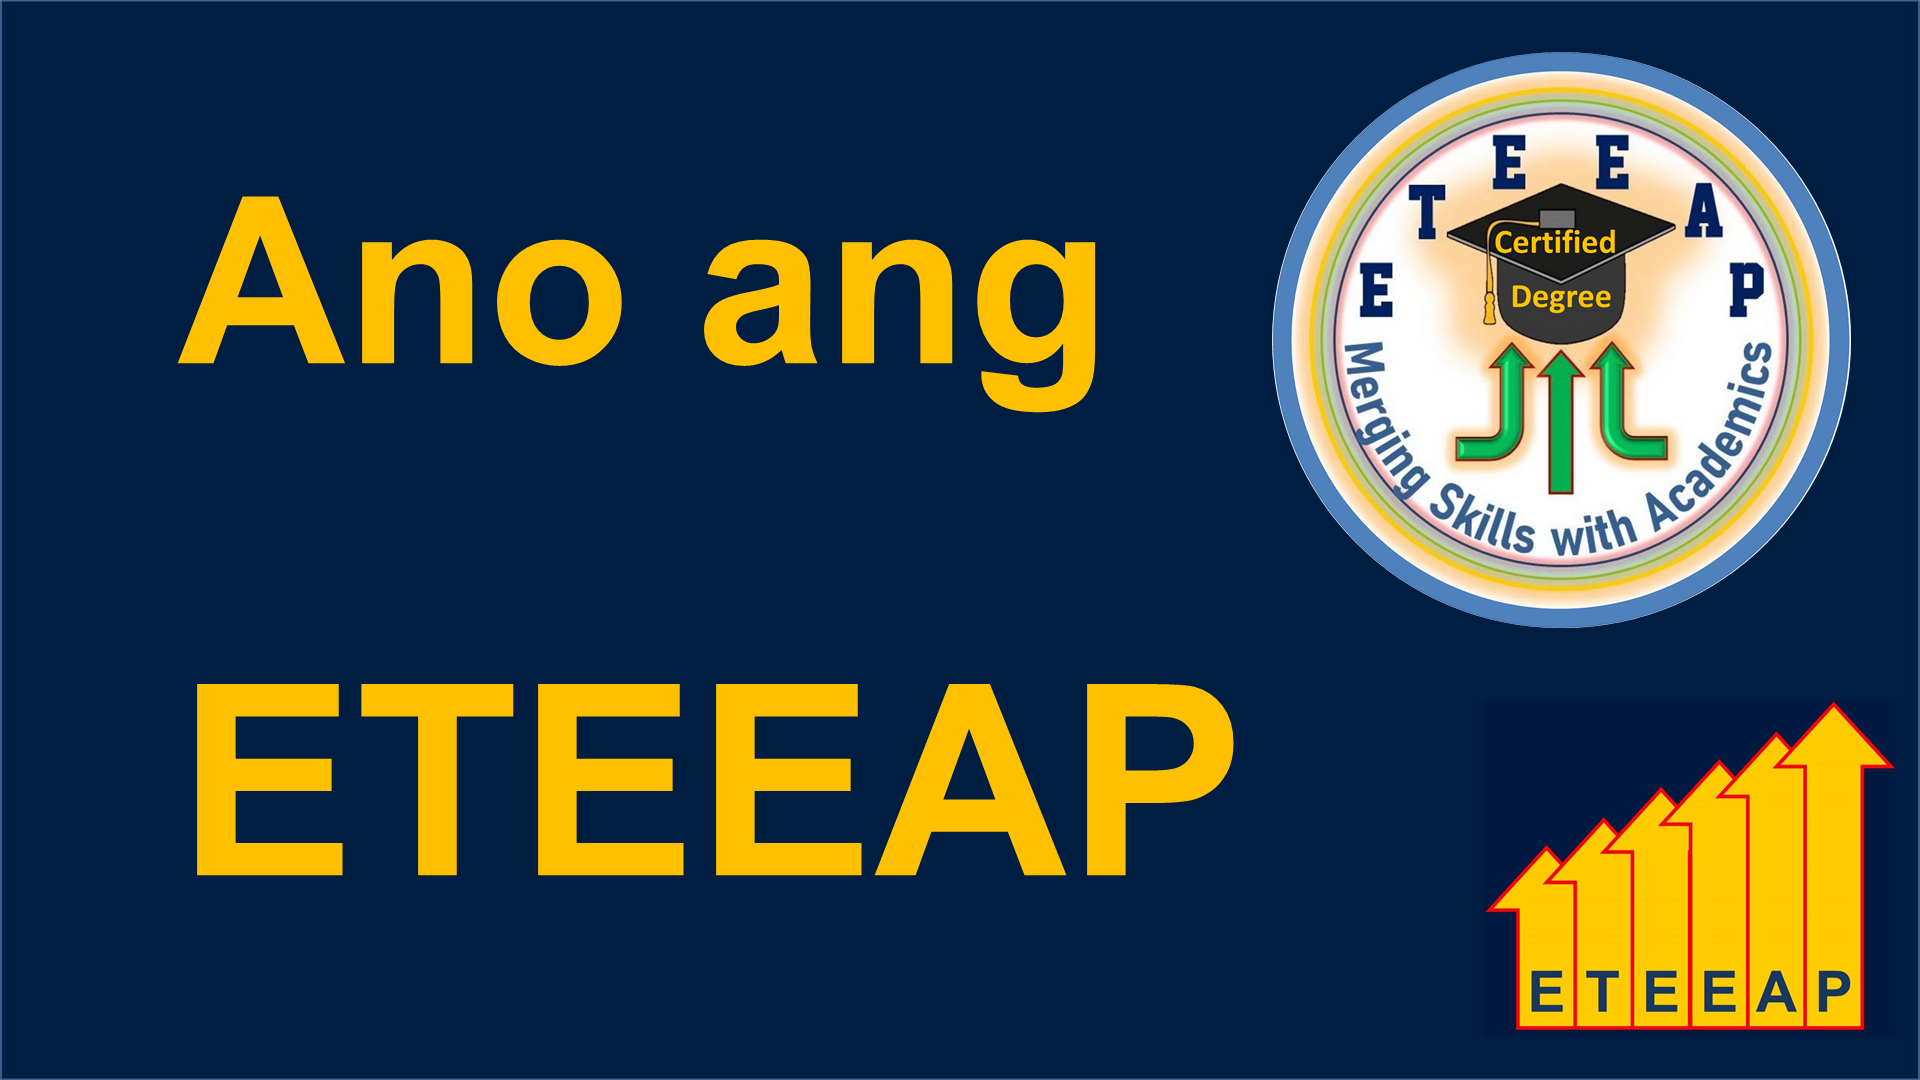  Ano Ang ETEEAP